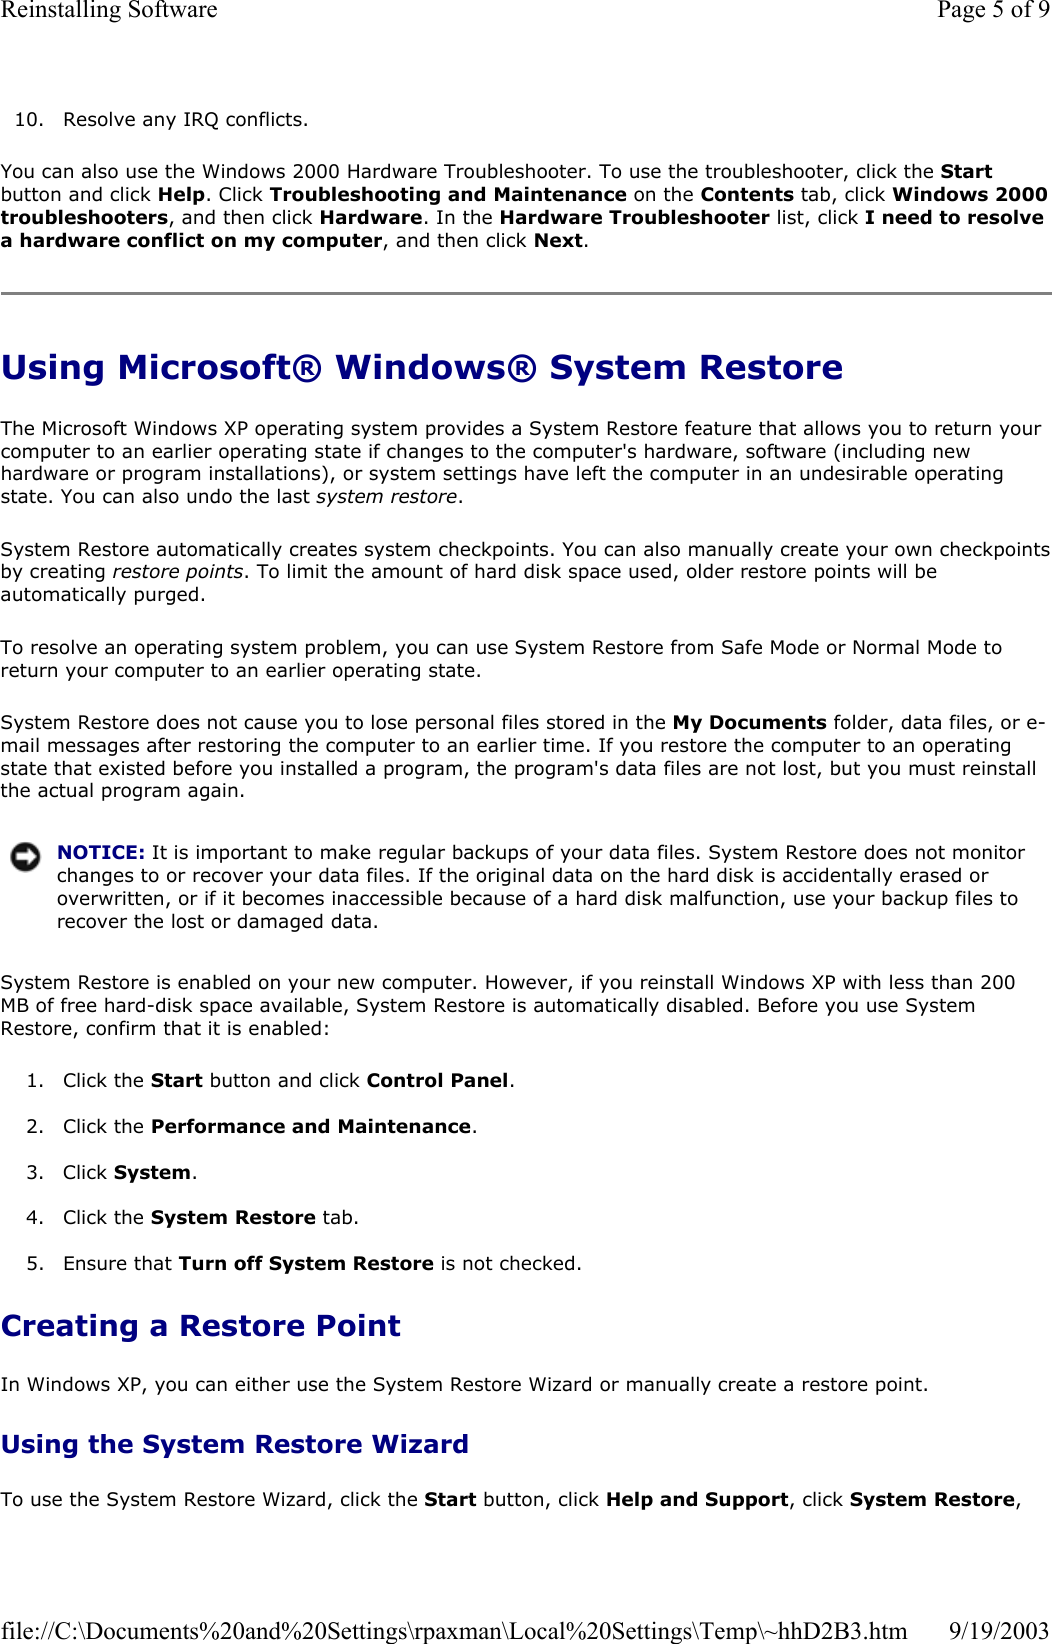 10. Resolve any IRQ conflicts.  You can also use the Windows 2000 Hardware Troubleshooter. To use the troubleshooter, click the Start button and click Help. Click Troubleshooting and Maintenance on the Contents tab, click Windows 2000 troubleshooters, and then click Hardware. In the Hardware Troubleshooter list, click I need to resolve a hardware conflict on my computer, and then click Next. Using Microsoft® Windows® System Restore The Microsoft Windows XP operating system provides a System Restore feature that allows you to return your computer to an earlier operating state if changes to the computer&apos;s hardware, software (including new hardware or program installations), or system settings have left the computer in an undesirable operating state. You can also undo the last system restore. System Restore automatically creates system checkpoints. You can also manually create your own checkpointsby creating restore points. To limit the amount of hard disk space used, older restore points will be automatically purged. To resolve an operating system problem, you can use System Restore from Safe Mode or Normal Mode to return your computer to an earlier operating state. System Restore does not cause you to lose personal files stored in the My Documents folder, data files, or e-mail messages after restoring the computer to an earlier time. If you restore the computer to an operating state that existed before you installed a program, the program&apos;s data files are not lost, but you must reinstall the actual program again.  System Restore is enabled on your new computer. However, if you reinstall Windows XP with less than 200 MB of free hard-disk space available, System Restore is automatically disabled. Before you use System Restore, confirm that it is enabled: 1. Click the Start button and click Control Panel.   2. Click the Performance and Maintenance.  3. Click System.  4. Click the System Restore tab.  5. Ensure that Turn off System Restore is not checked.   Creating a Restore Point In Windows XP, you can either use the System Restore Wizard or manually create a restore point. Using the System Restore Wizard To use the System Restore Wizard, click the Start button, click Help and Support, click System Restore, NOTICE: It is important to make regular backups of your data files. System Restore does not monitor changes to or recover your data files. If the original data on the hard disk is accidentally erased or overwritten, or if it becomes inaccessible because of a hard disk malfunction, use your backup files to recover the lost or damaged data.Page 5 of 9Reinstalling Software9/19/2003file://C:\Documents%20and%20Settings\rpaxman\Local%20Settings\Temp\~hhD2B3.htm